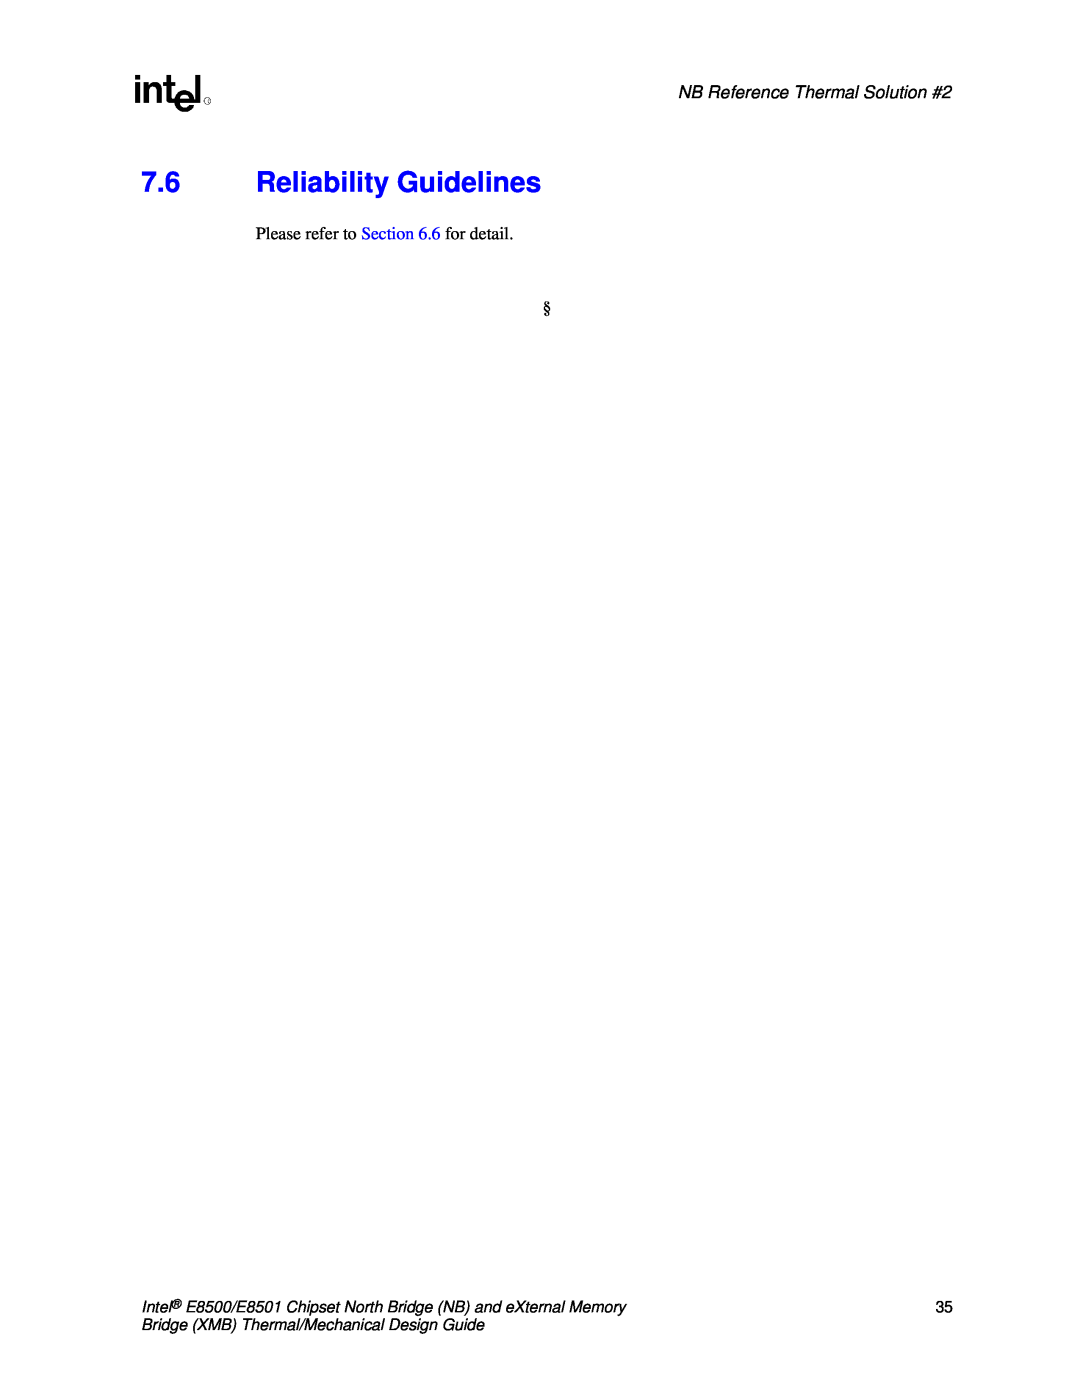 Intel E8501 manual 7.6Reliability Guidelines, NB Reference Thermal Solution #2, Please refer to .6 for detail § 